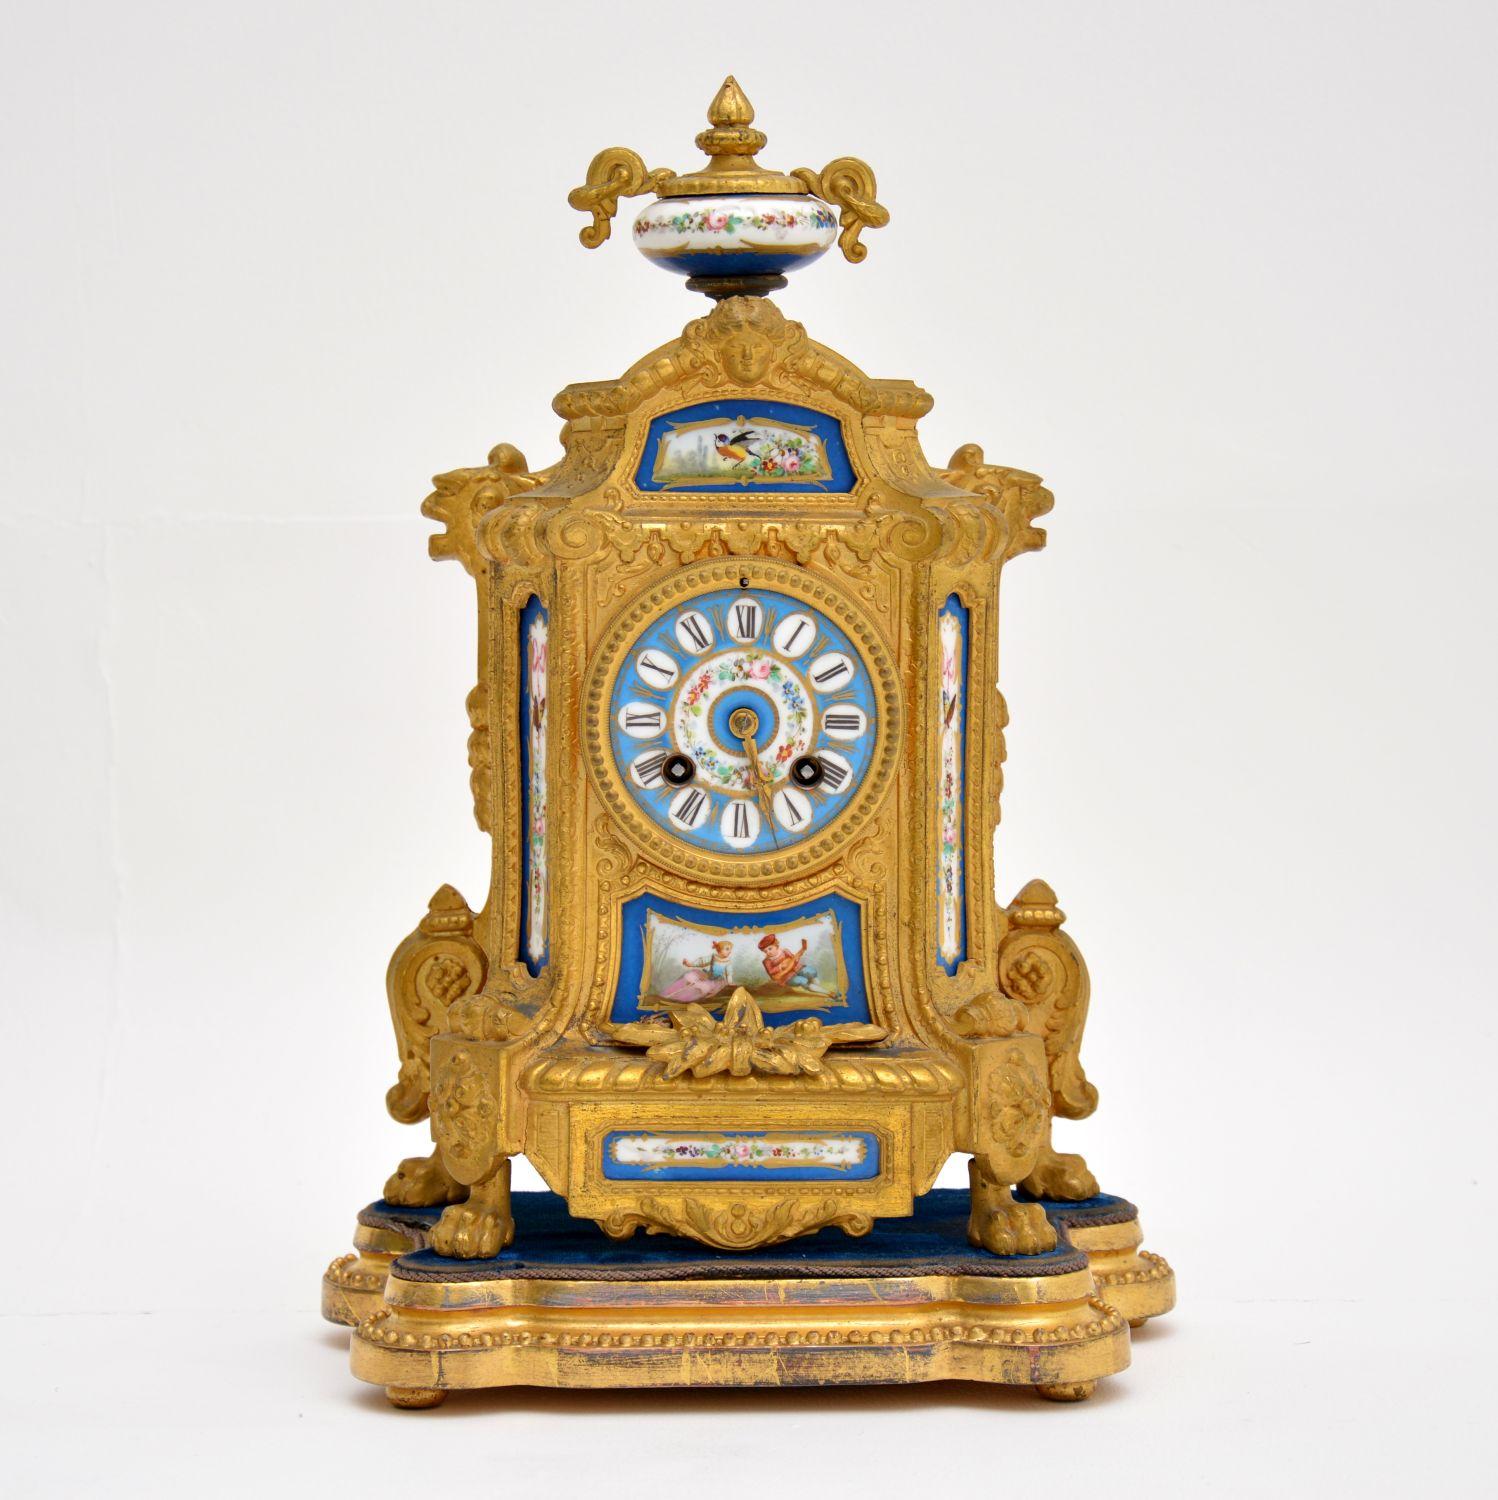 Antique French gilt metal clock with Sevres porcelain all in good condition and dating to circa 1880s period.

The porcelain is beautifully hand painted & the gilt metal case is well cast with many fine details. The makers name, Brunfaut is